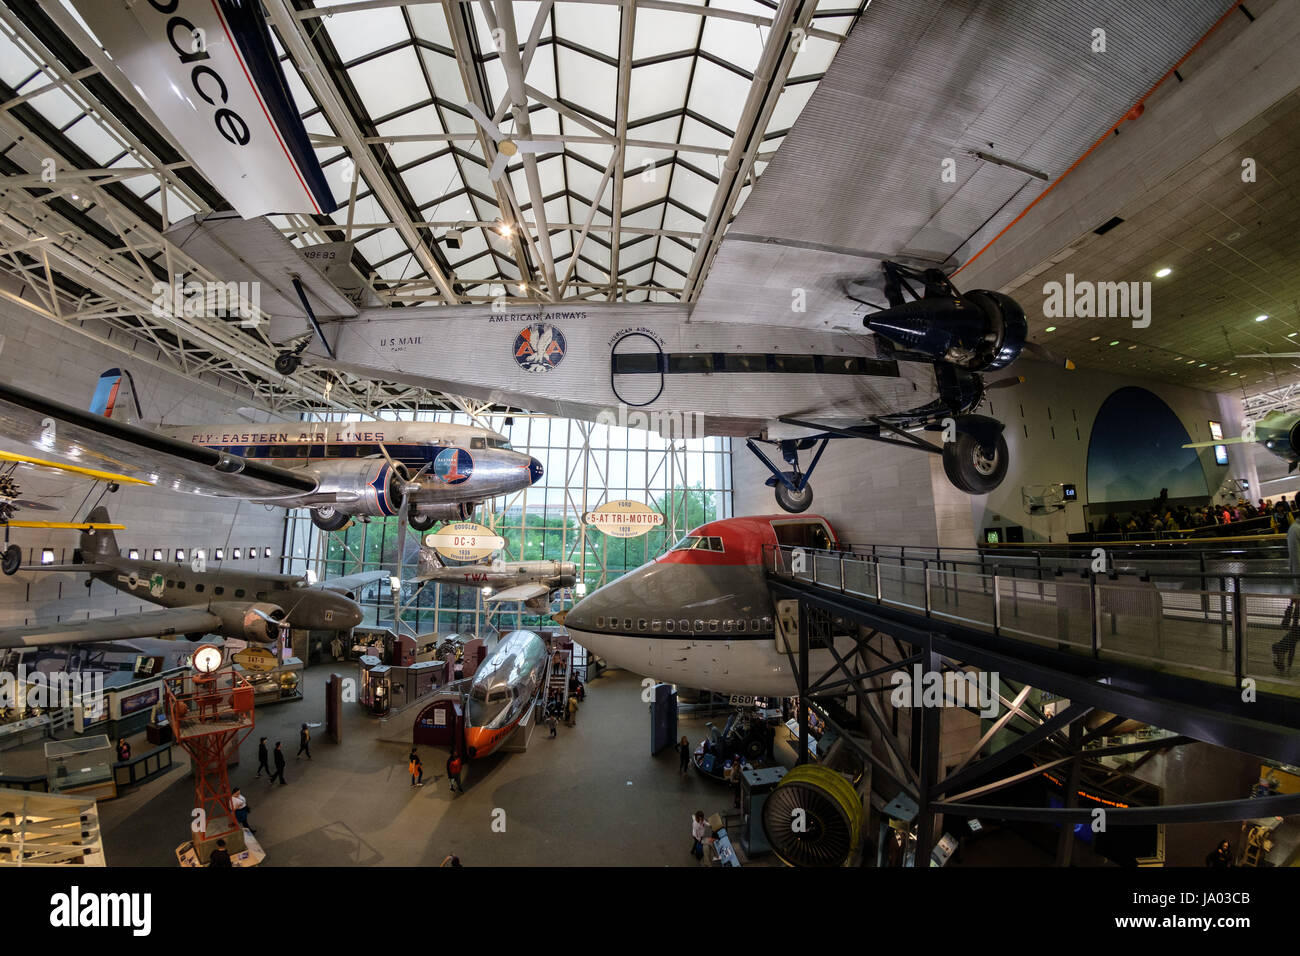 American Airways US Mail aeroplane, National Air and Space Museum, Washington D.C., USA Stock Photo